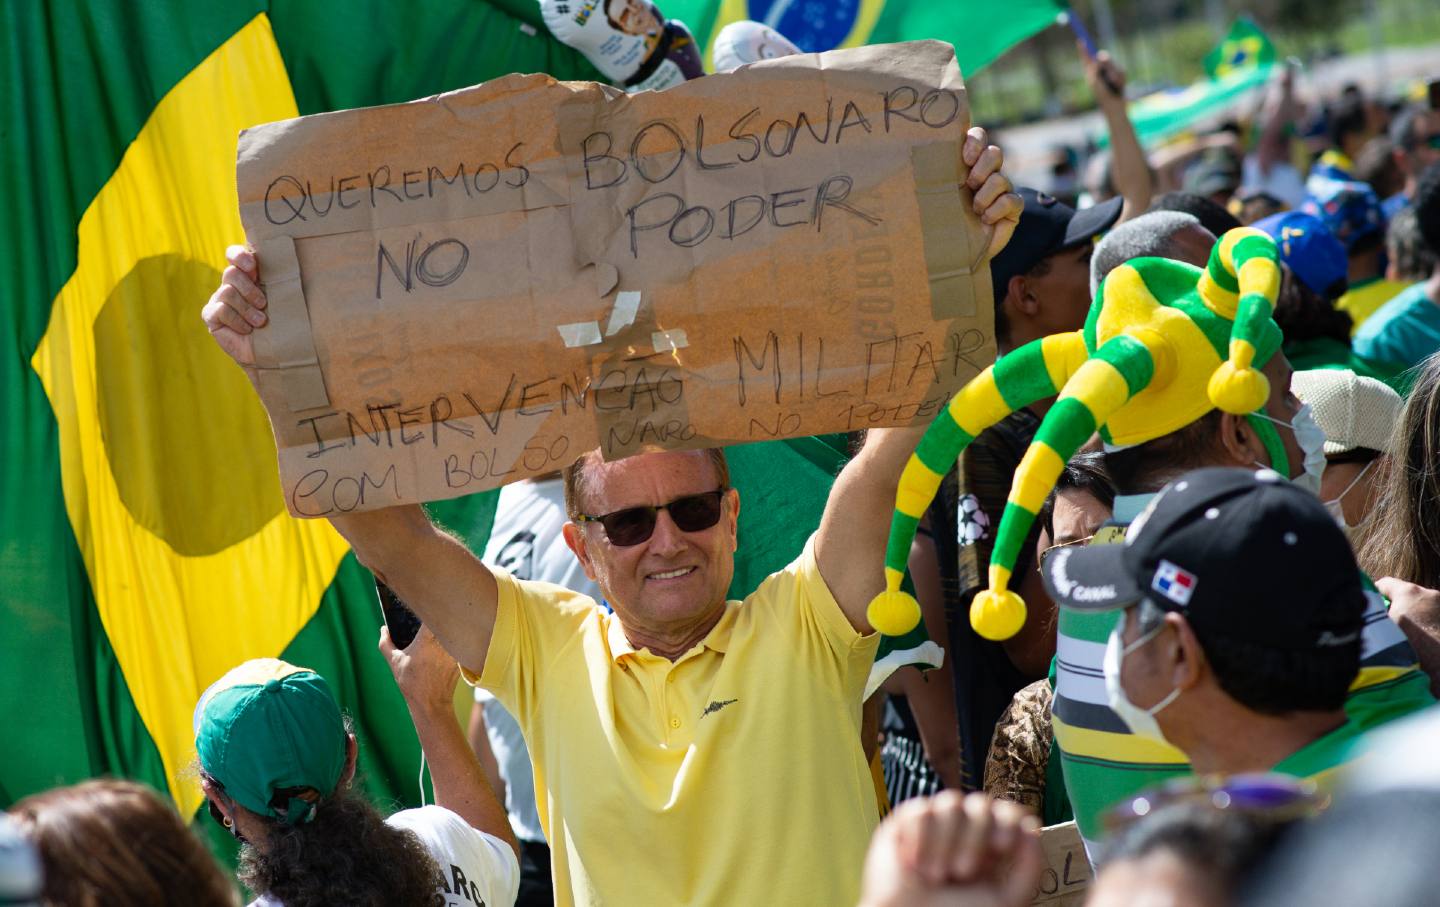 A man with sunglasses holds a cardboard sign, with writing in Portuguese.